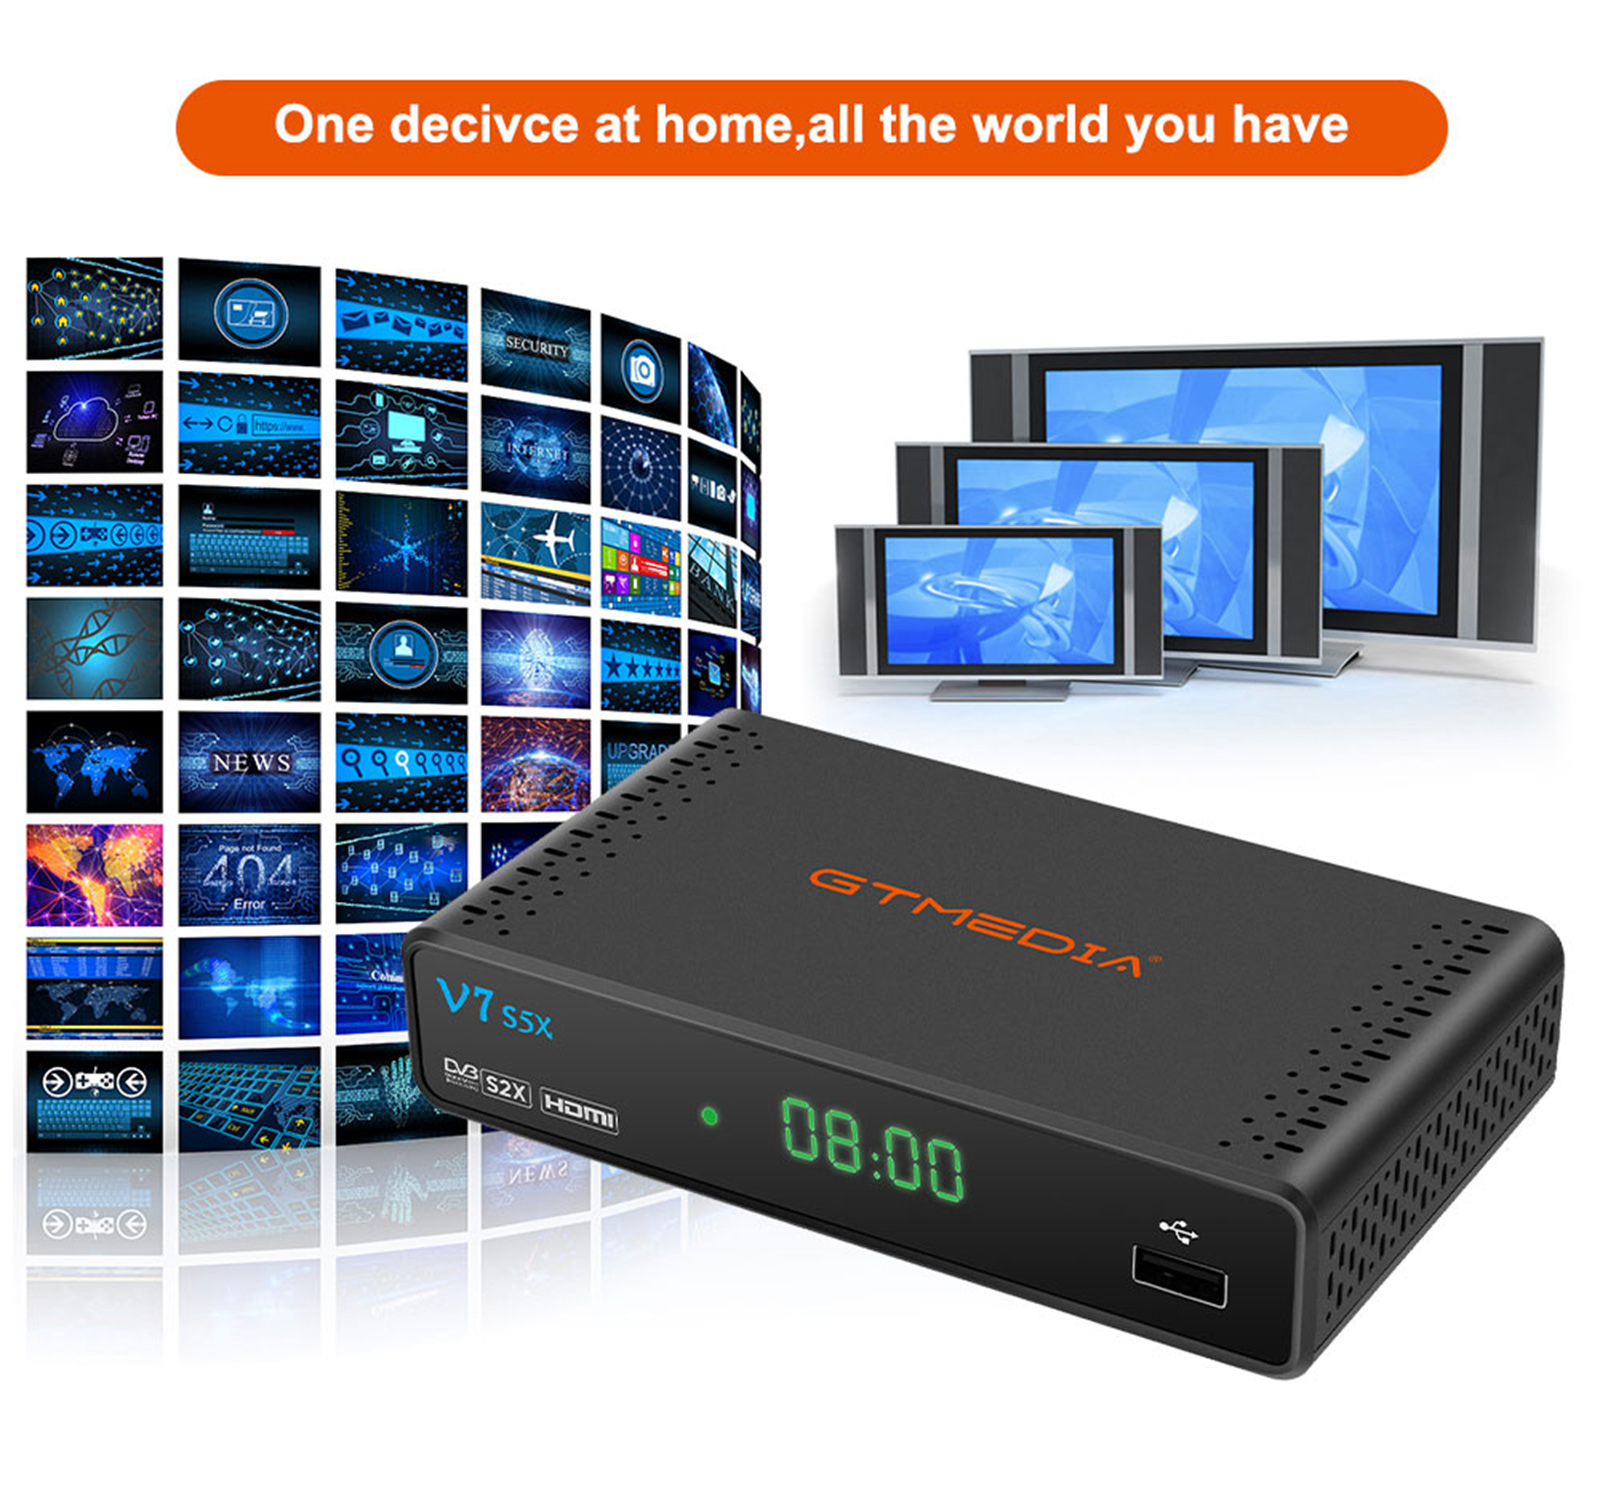 GTMEDIA-V7-S5X-DVB-S-DVB-S2-S2X-H265-1080P-HD-Satellite-TV-Receiver-Decoder-Set-Top-Box-with-USB-WIF-1930174-3